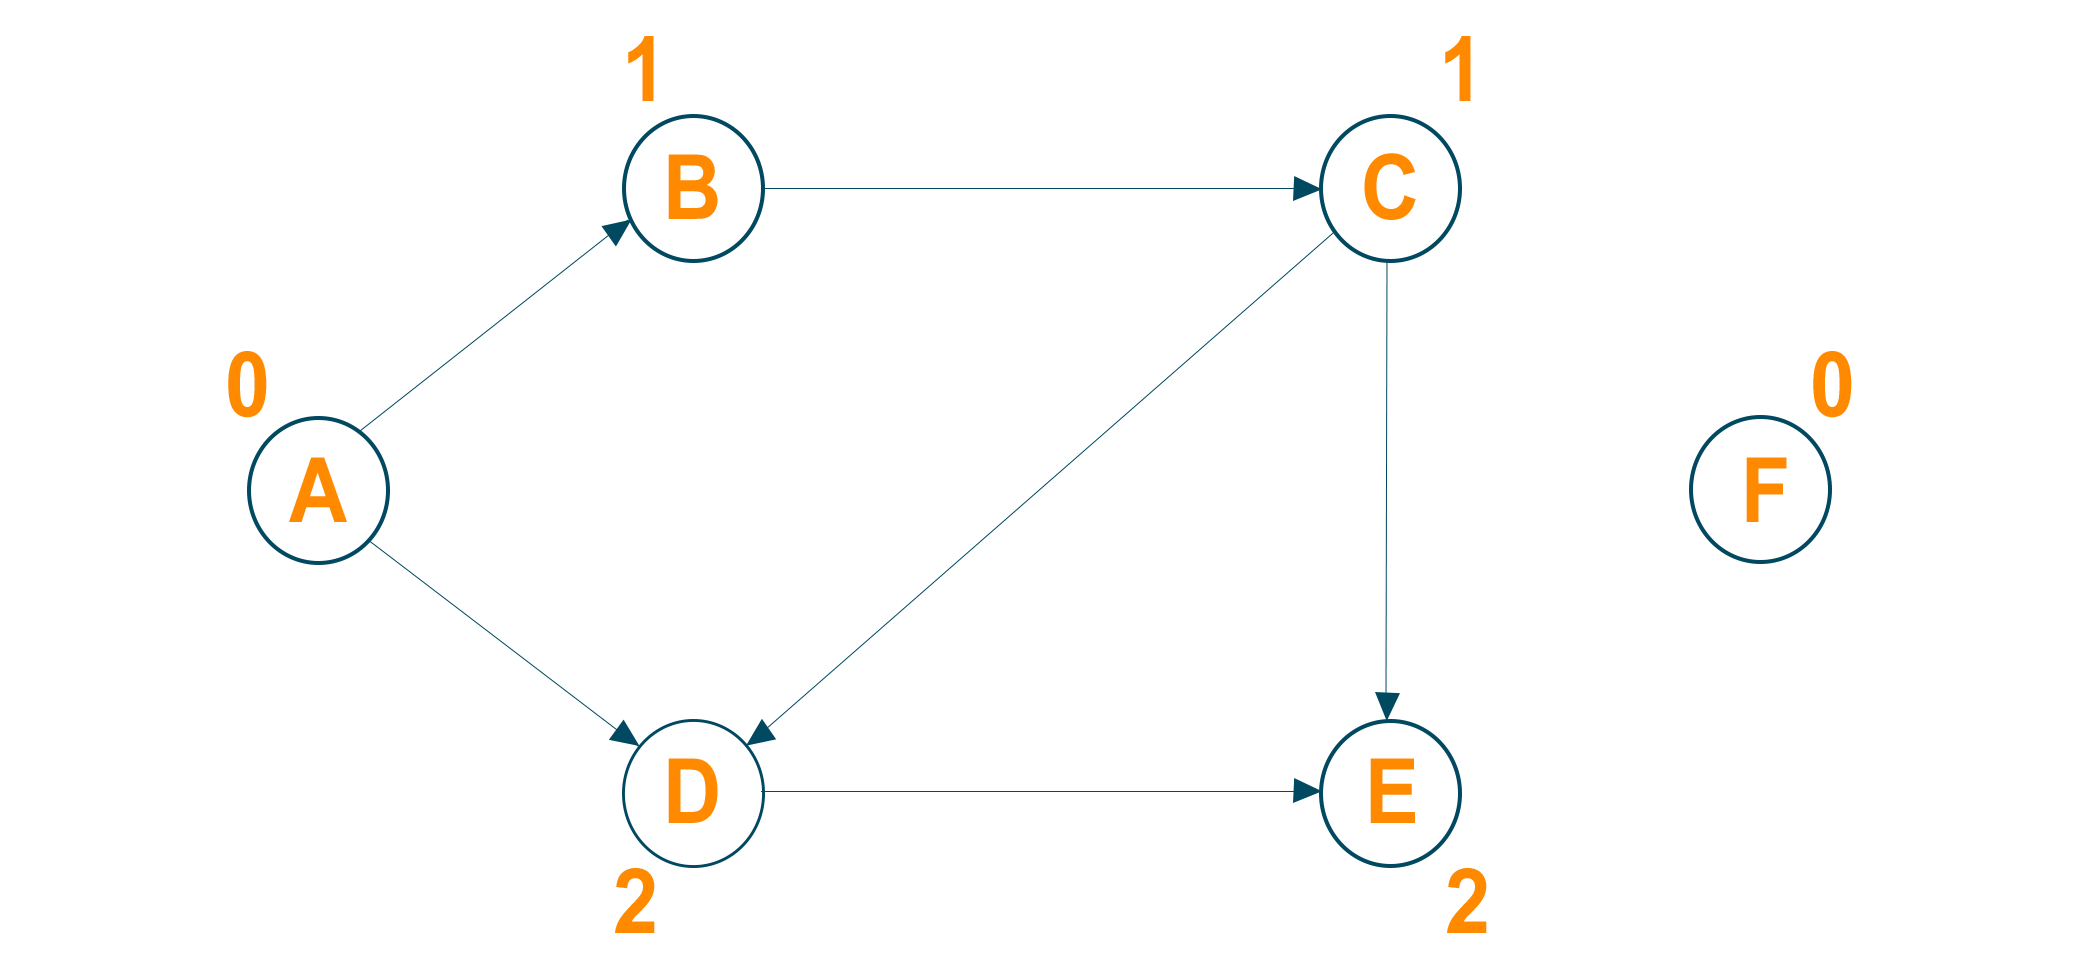 Directed acyclic graph 